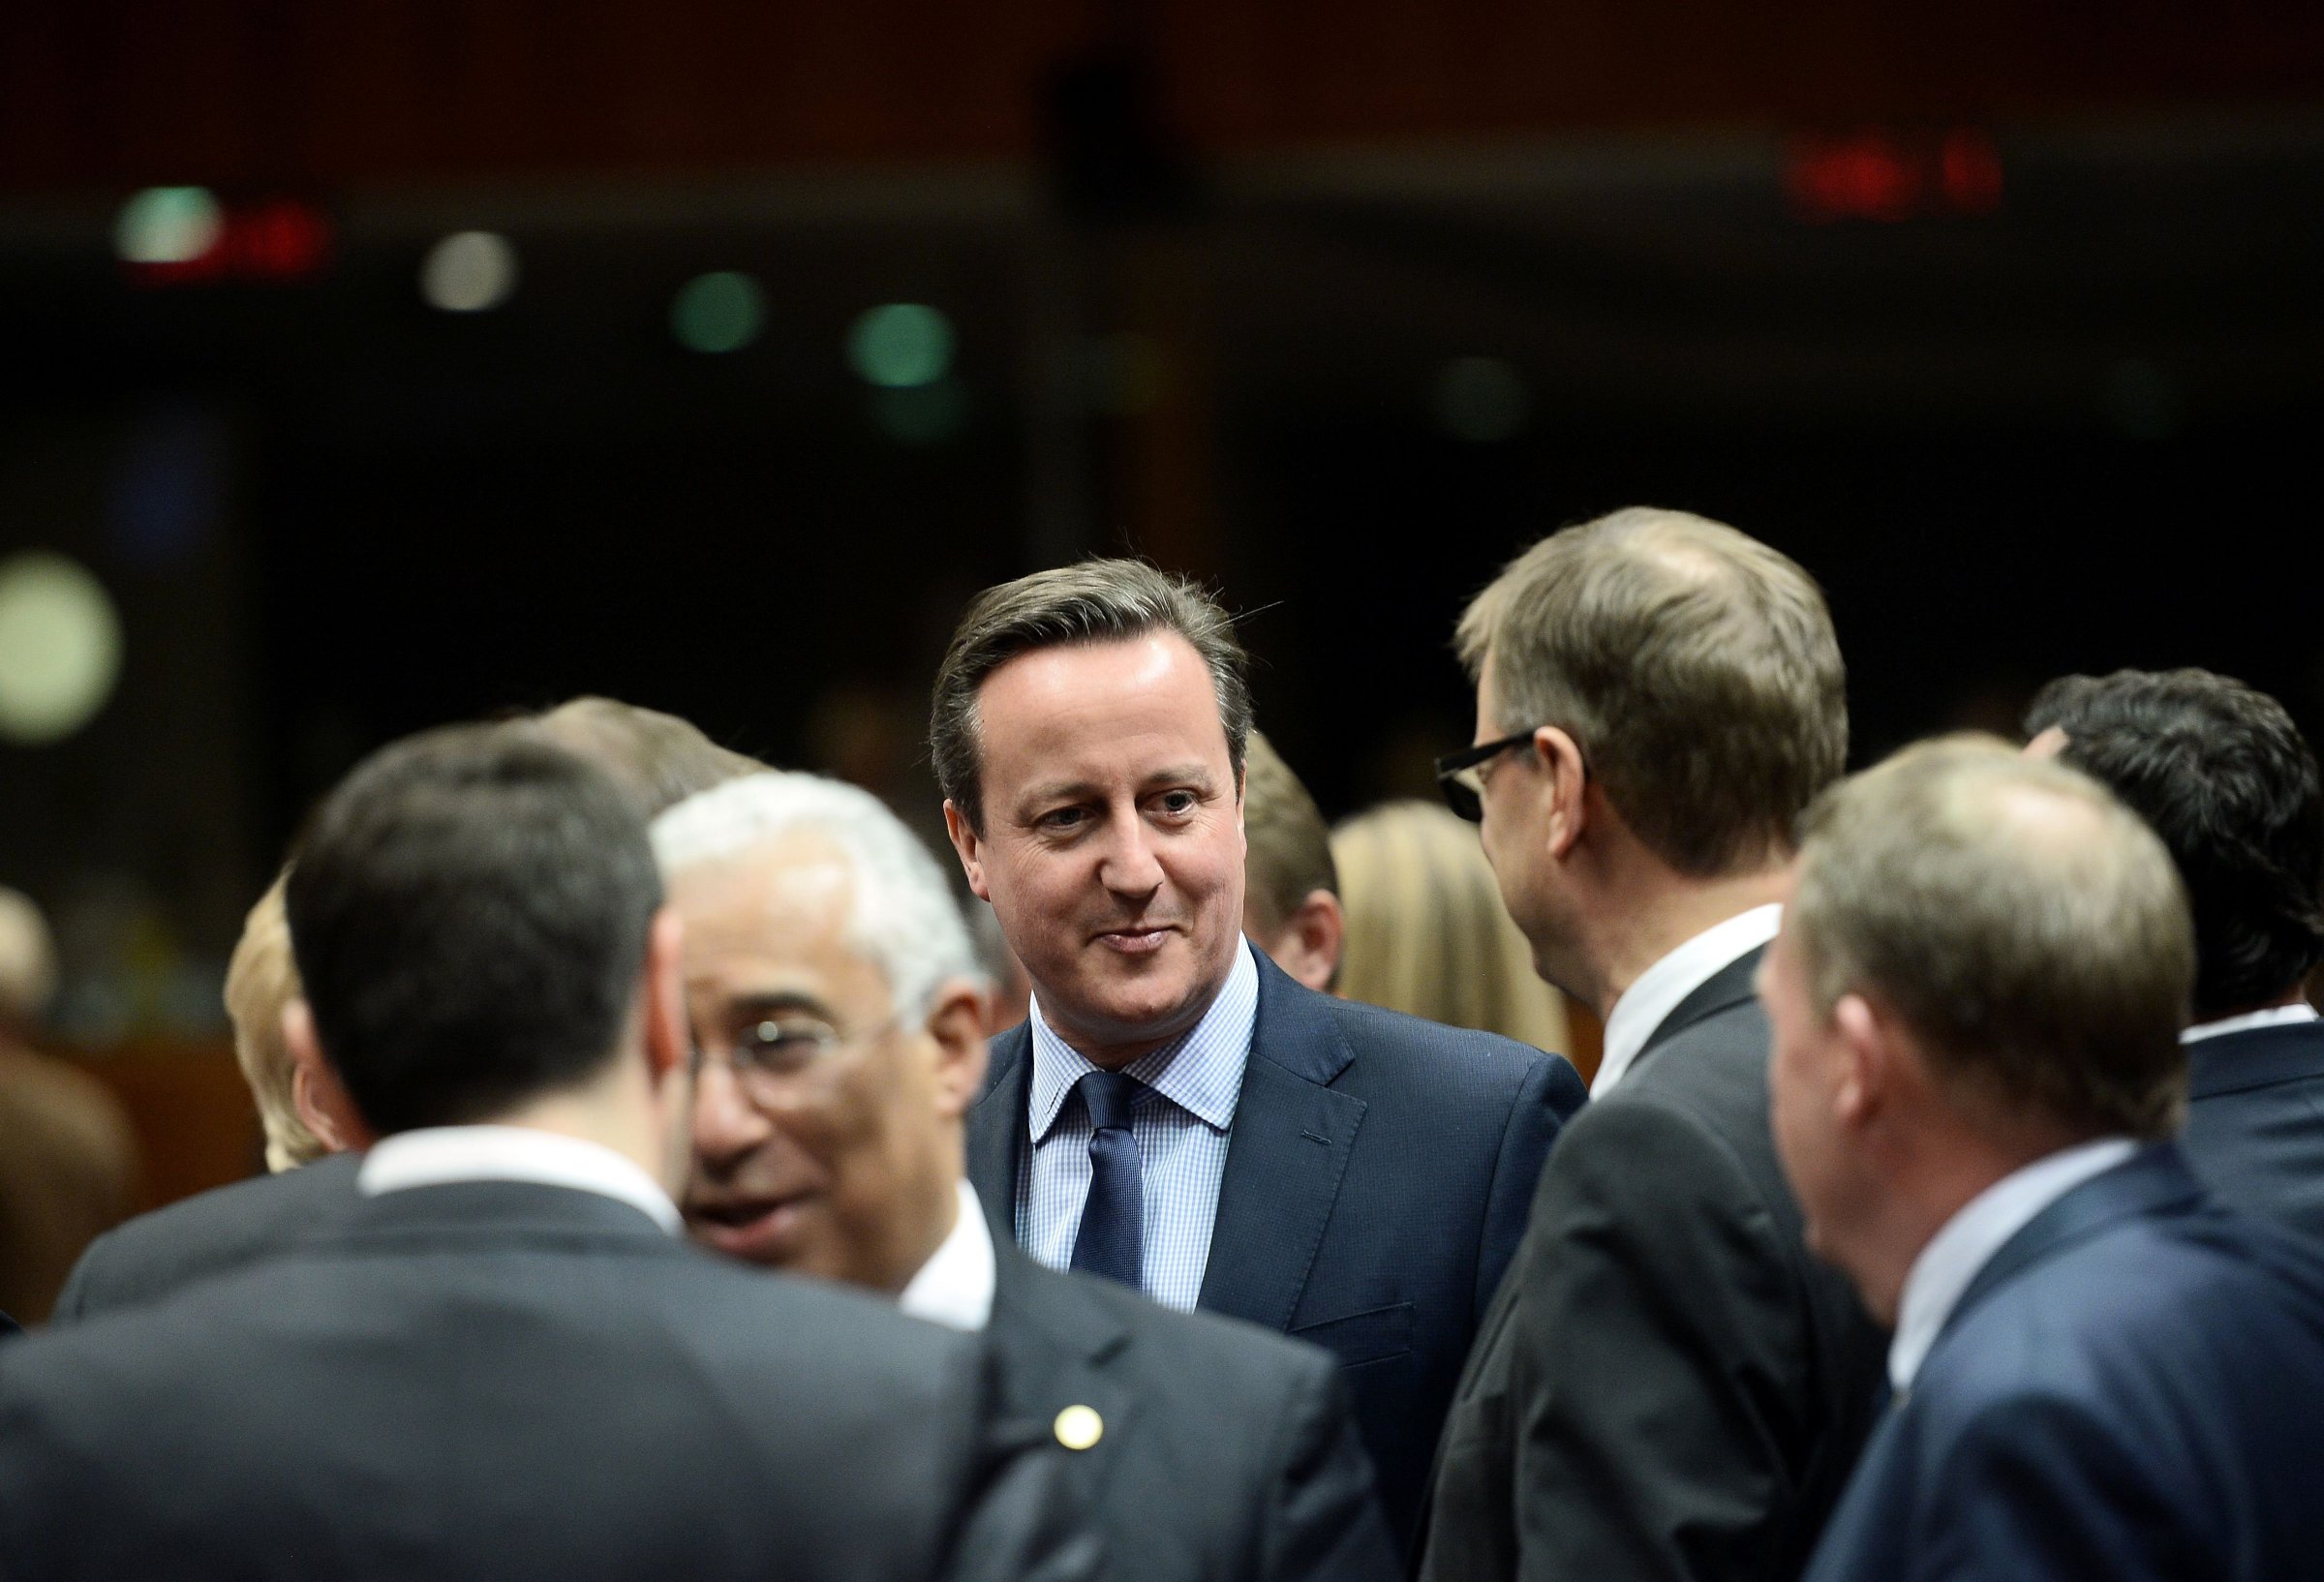 Britain's Prime Minister David Cameron attends an EU summit meeting, at the European Union council in Brussels, on Feb. 18, 2016.